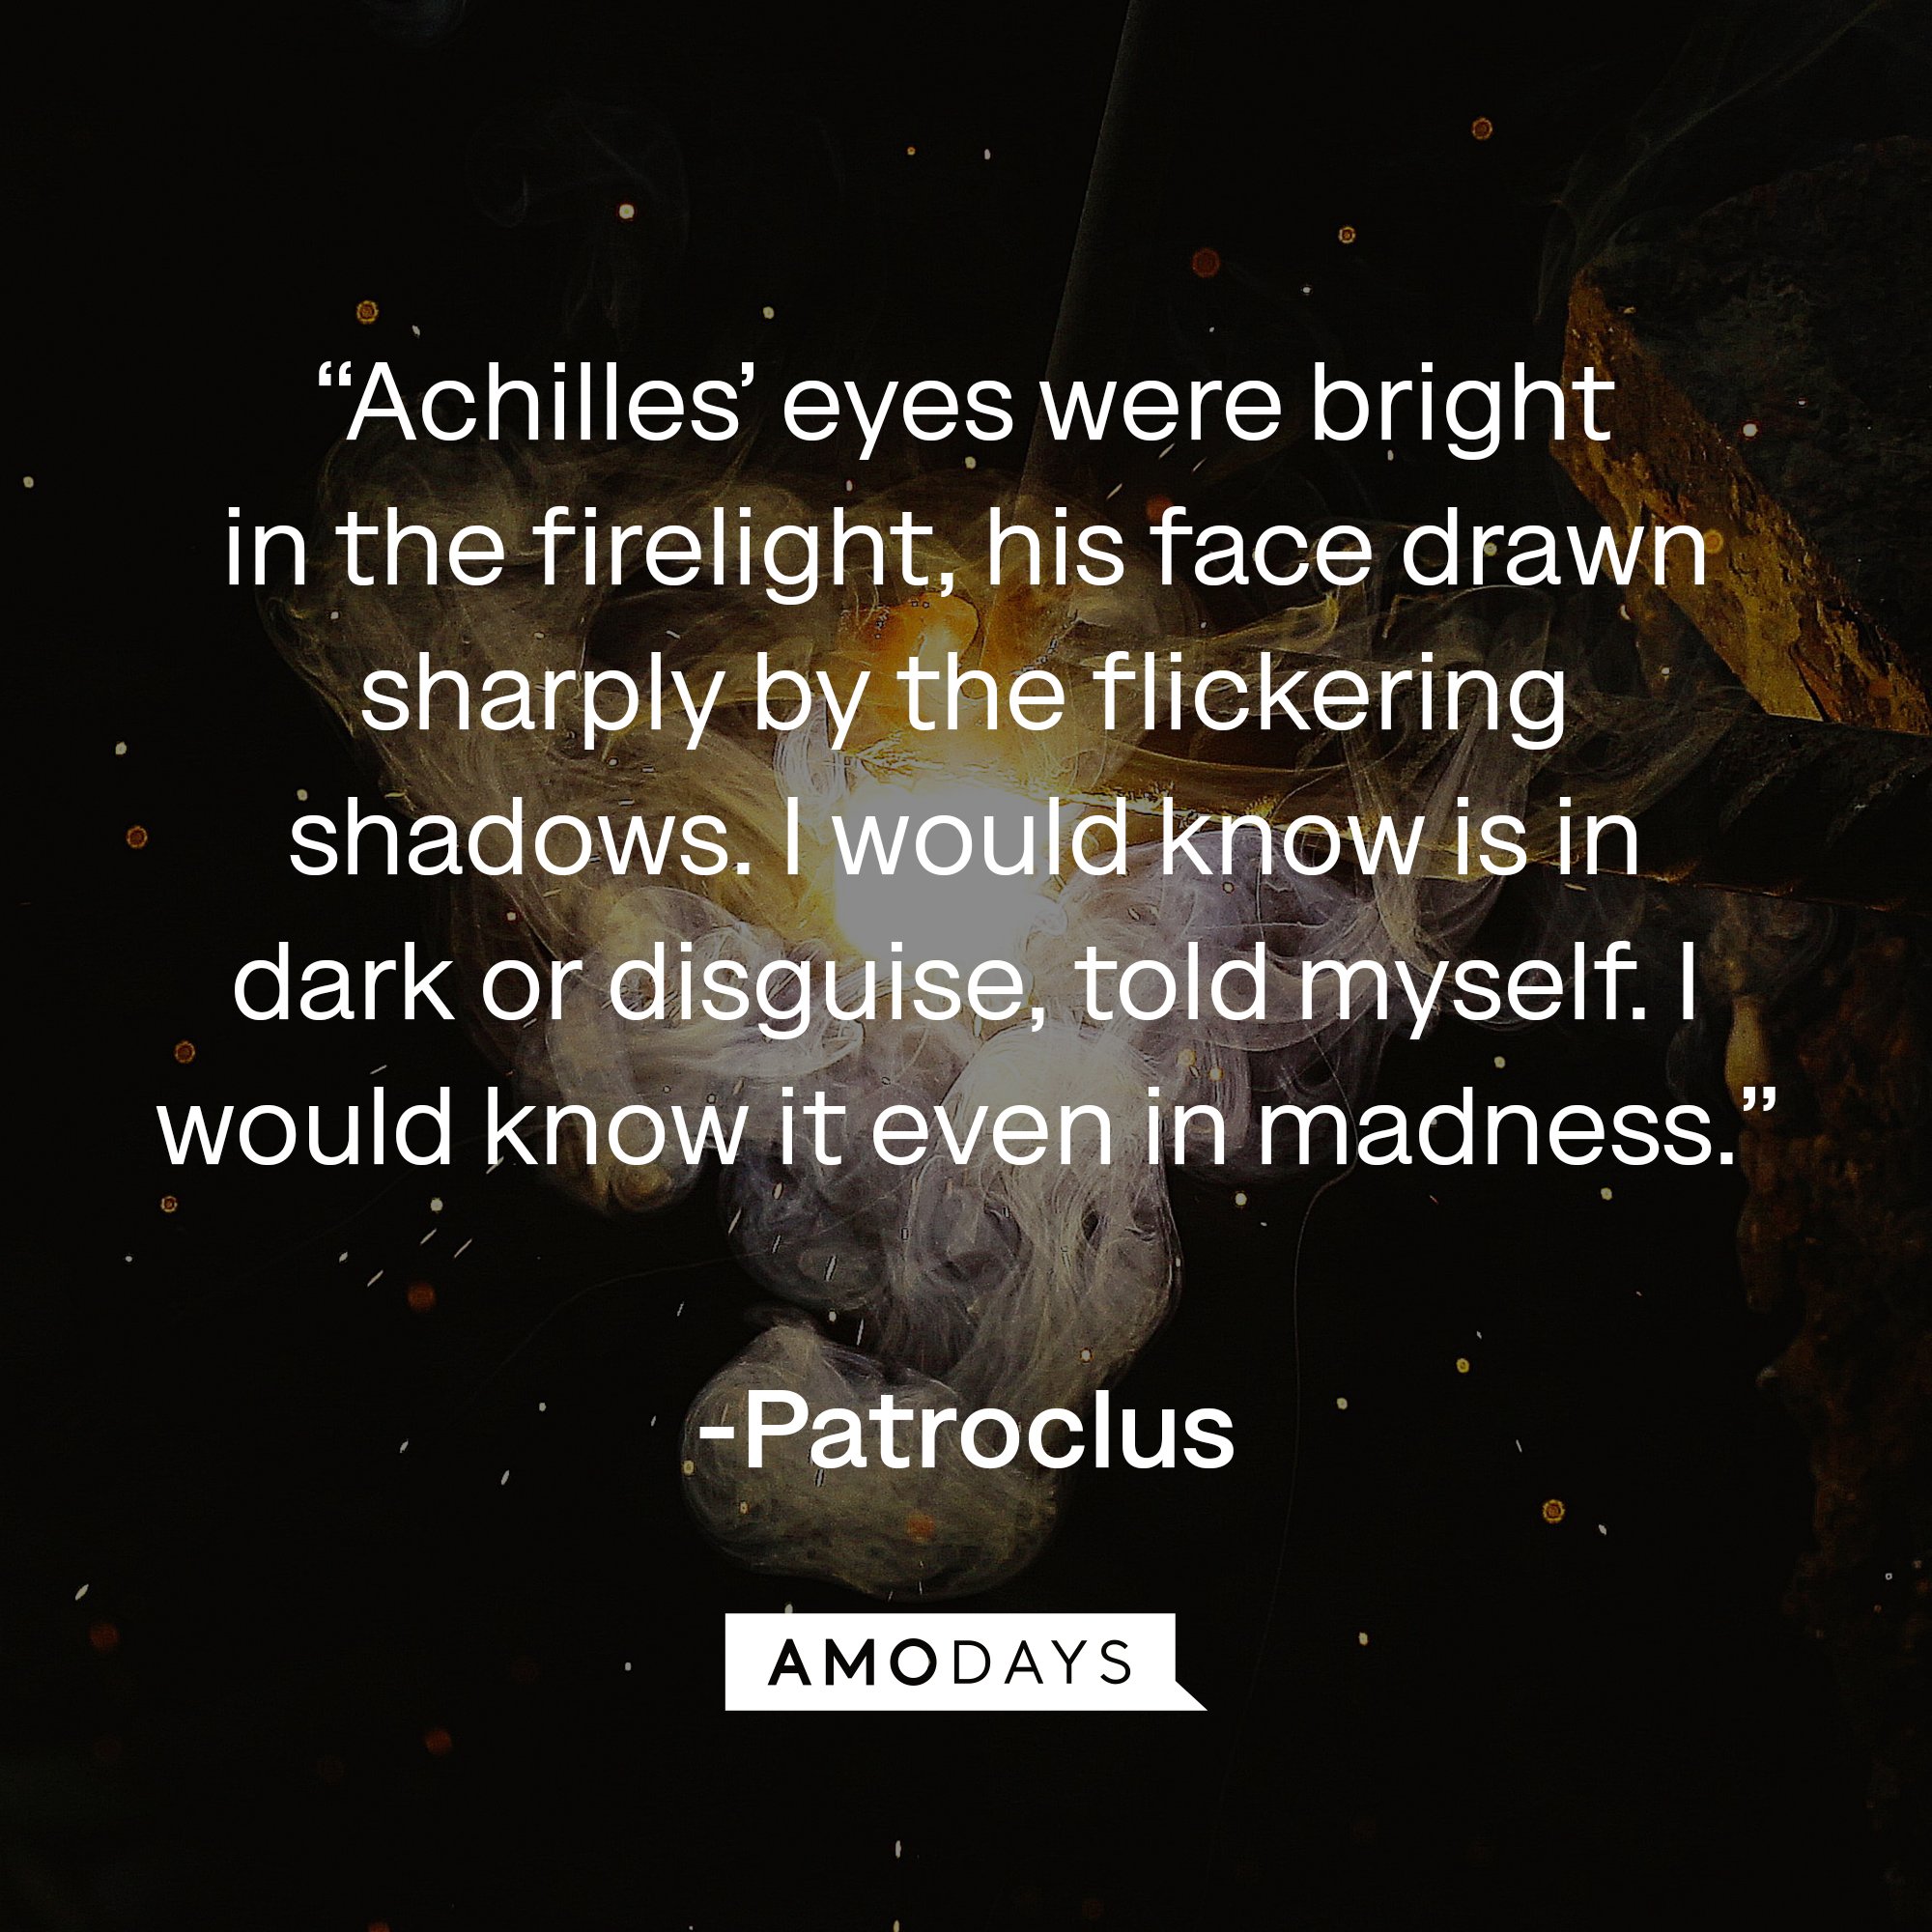 Patroclus's quote: “Achilles’ eyes were bright in the firelight, his face drawn sharply by the flickering shadows. I would know is in dark or disguise, told myself. I would know it even in madness.” | Image: AmoDays